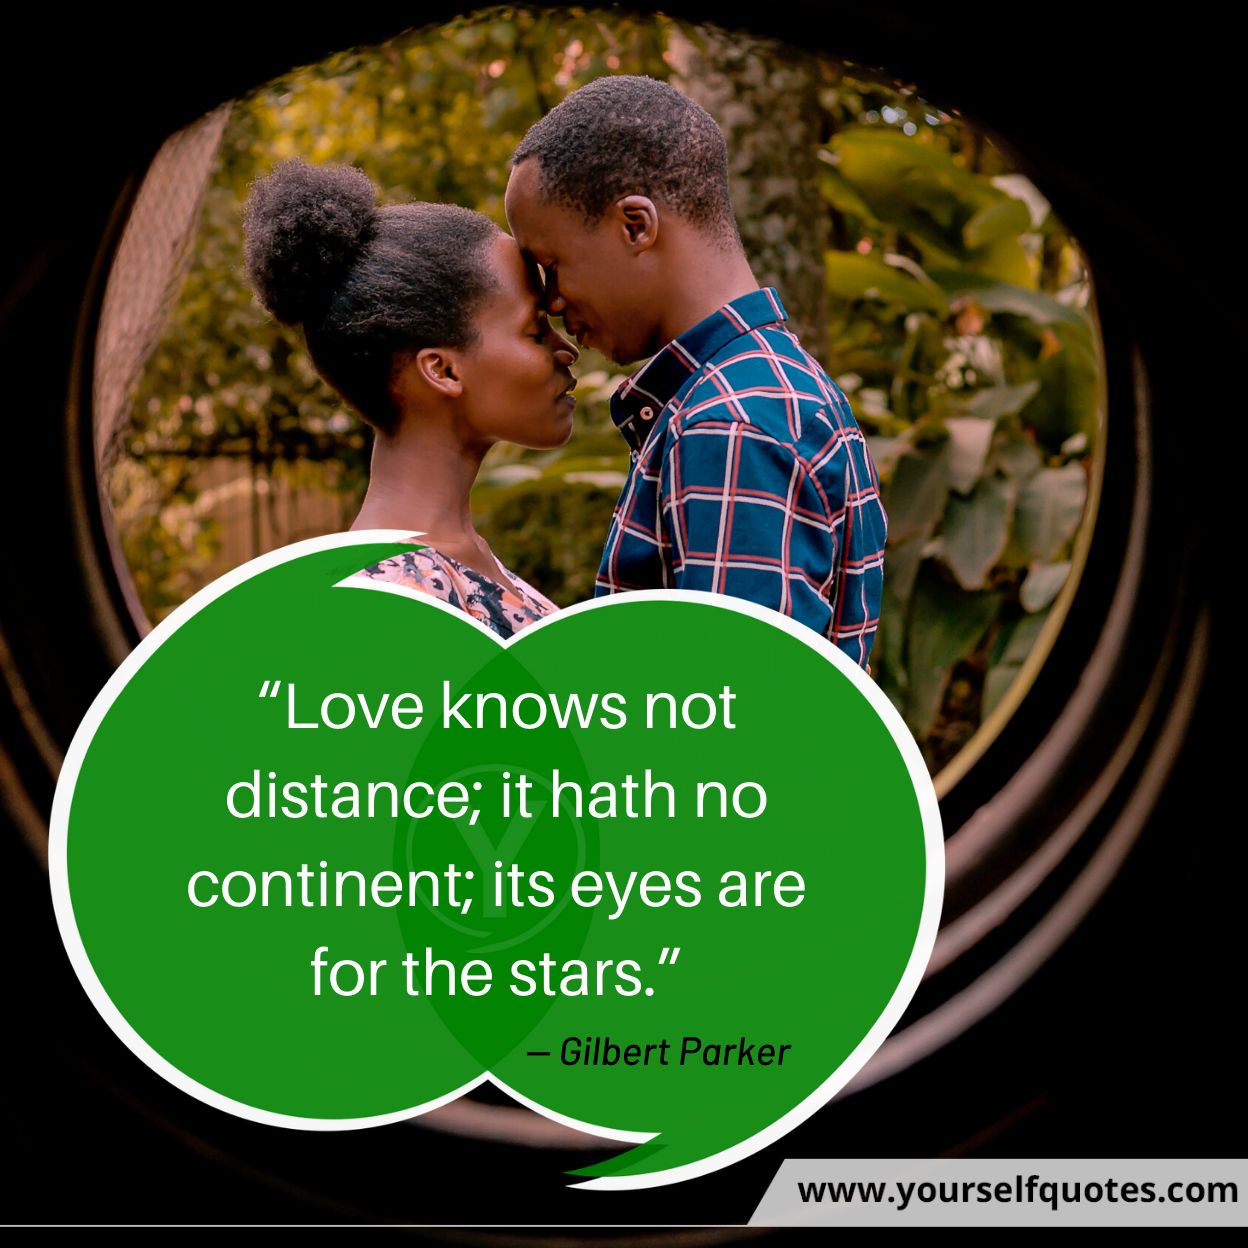 Inspiring Quotes on Love